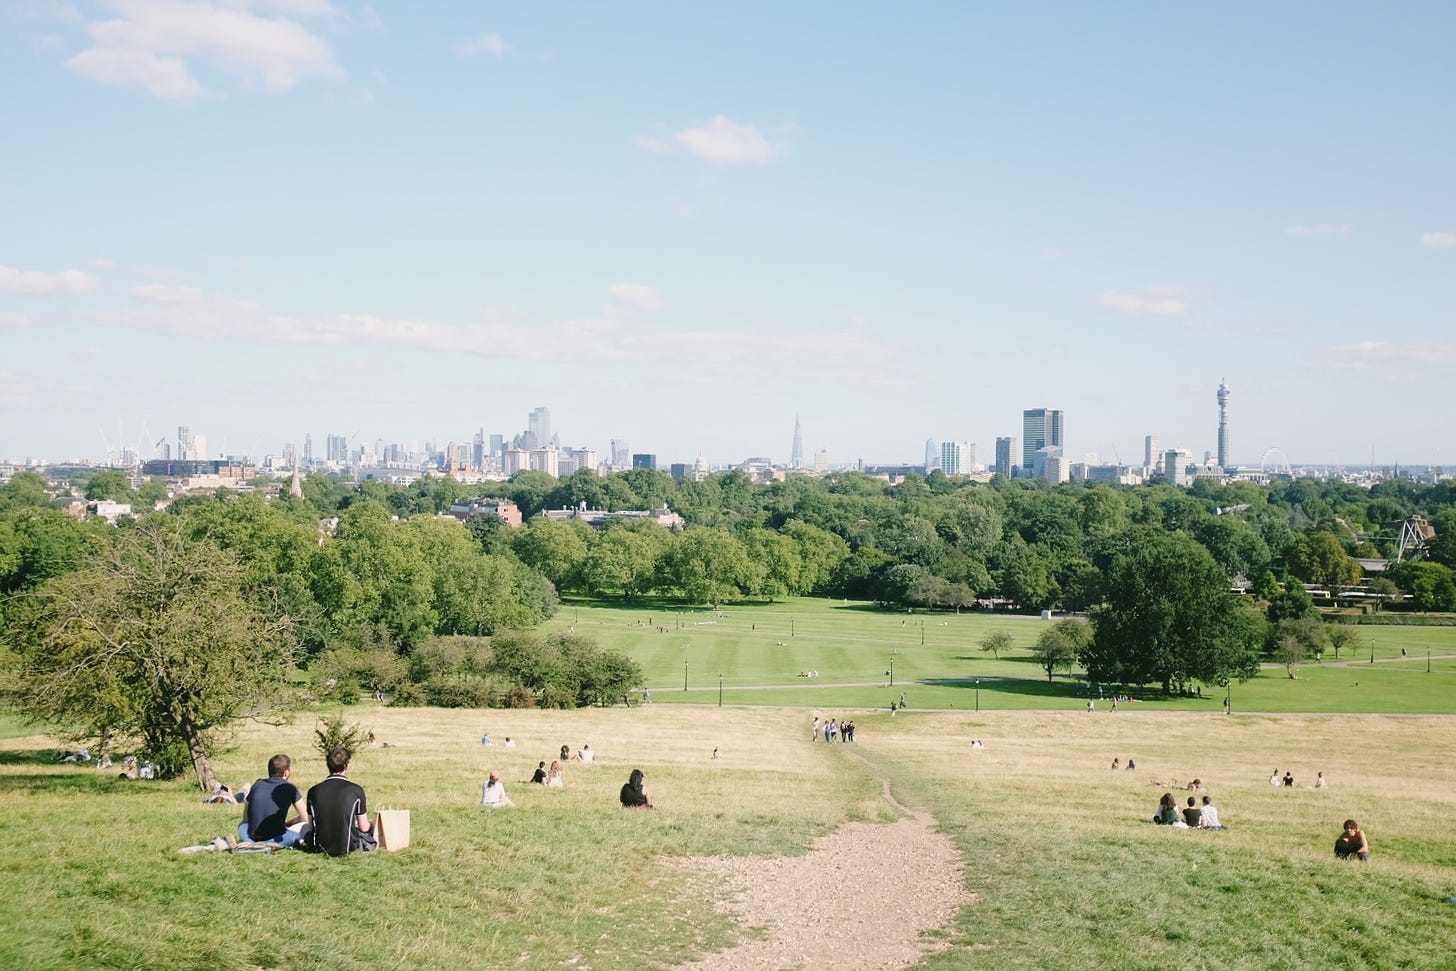 A blue-sky day on top of a hill looking out over the skyline of London. The view is from Primrose Hill in the west, looking south-east. Regent's park sits below the city buildings, covered in green trees. In the foreground the hill itself is a burnished late-summer gold, and people sit in pairs or small groups looking out at the vista.